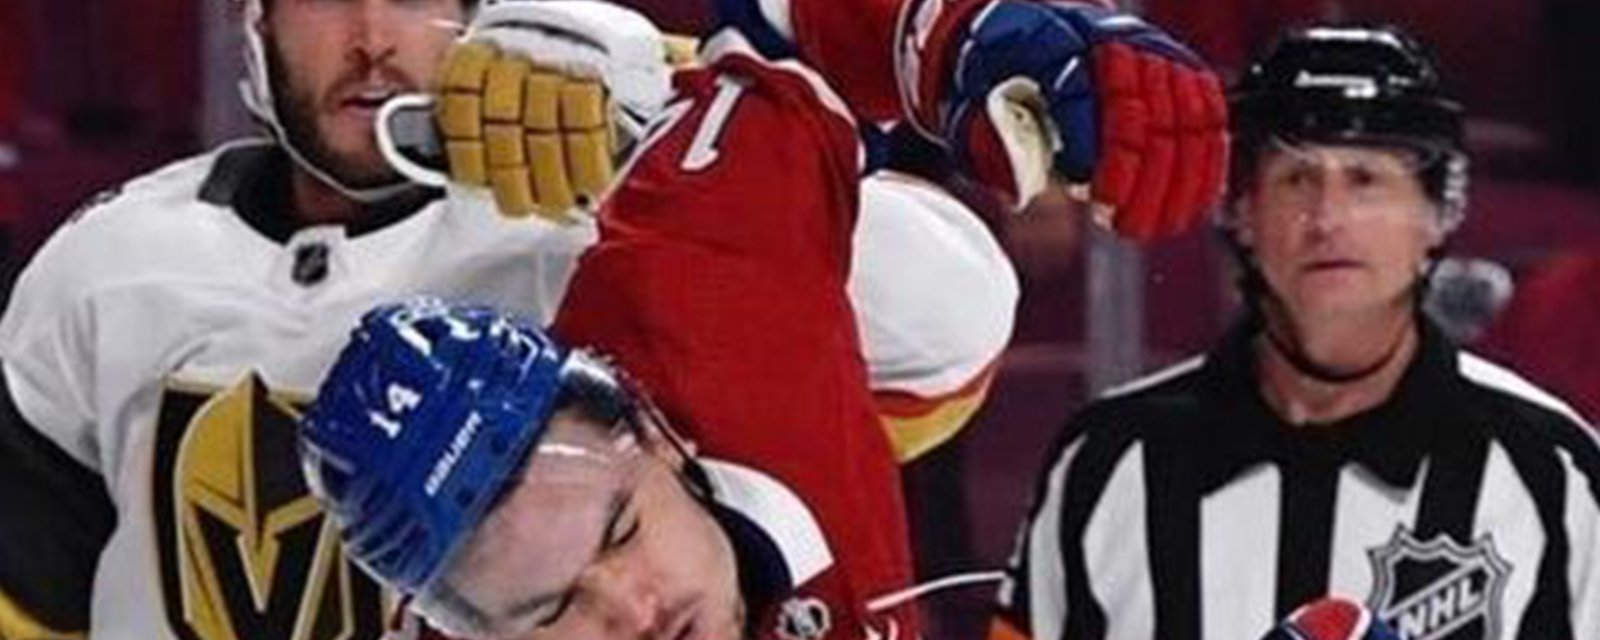 Nearly 30,000 Habs fans sign petition demanding NHL referee Chris Lee be fired